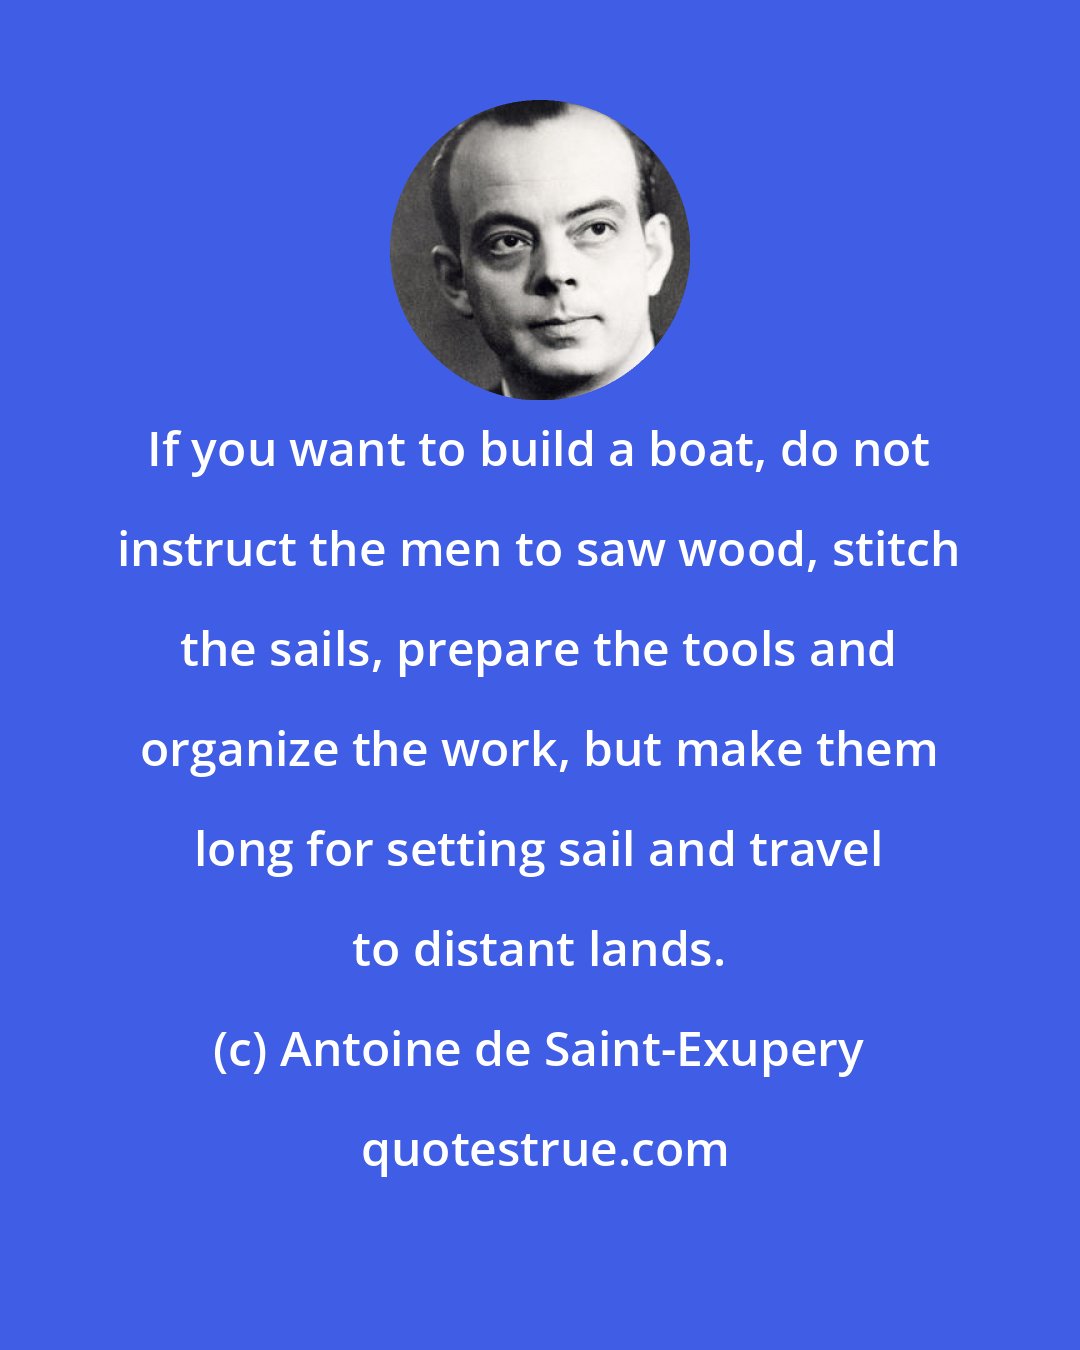 Antoine de Saint-Exupery: If you want to build a boat, do not instruct the men to saw wood, stitch the sails, prepare the tools and organize the work, but make them long for setting sail and travel to distant lands.